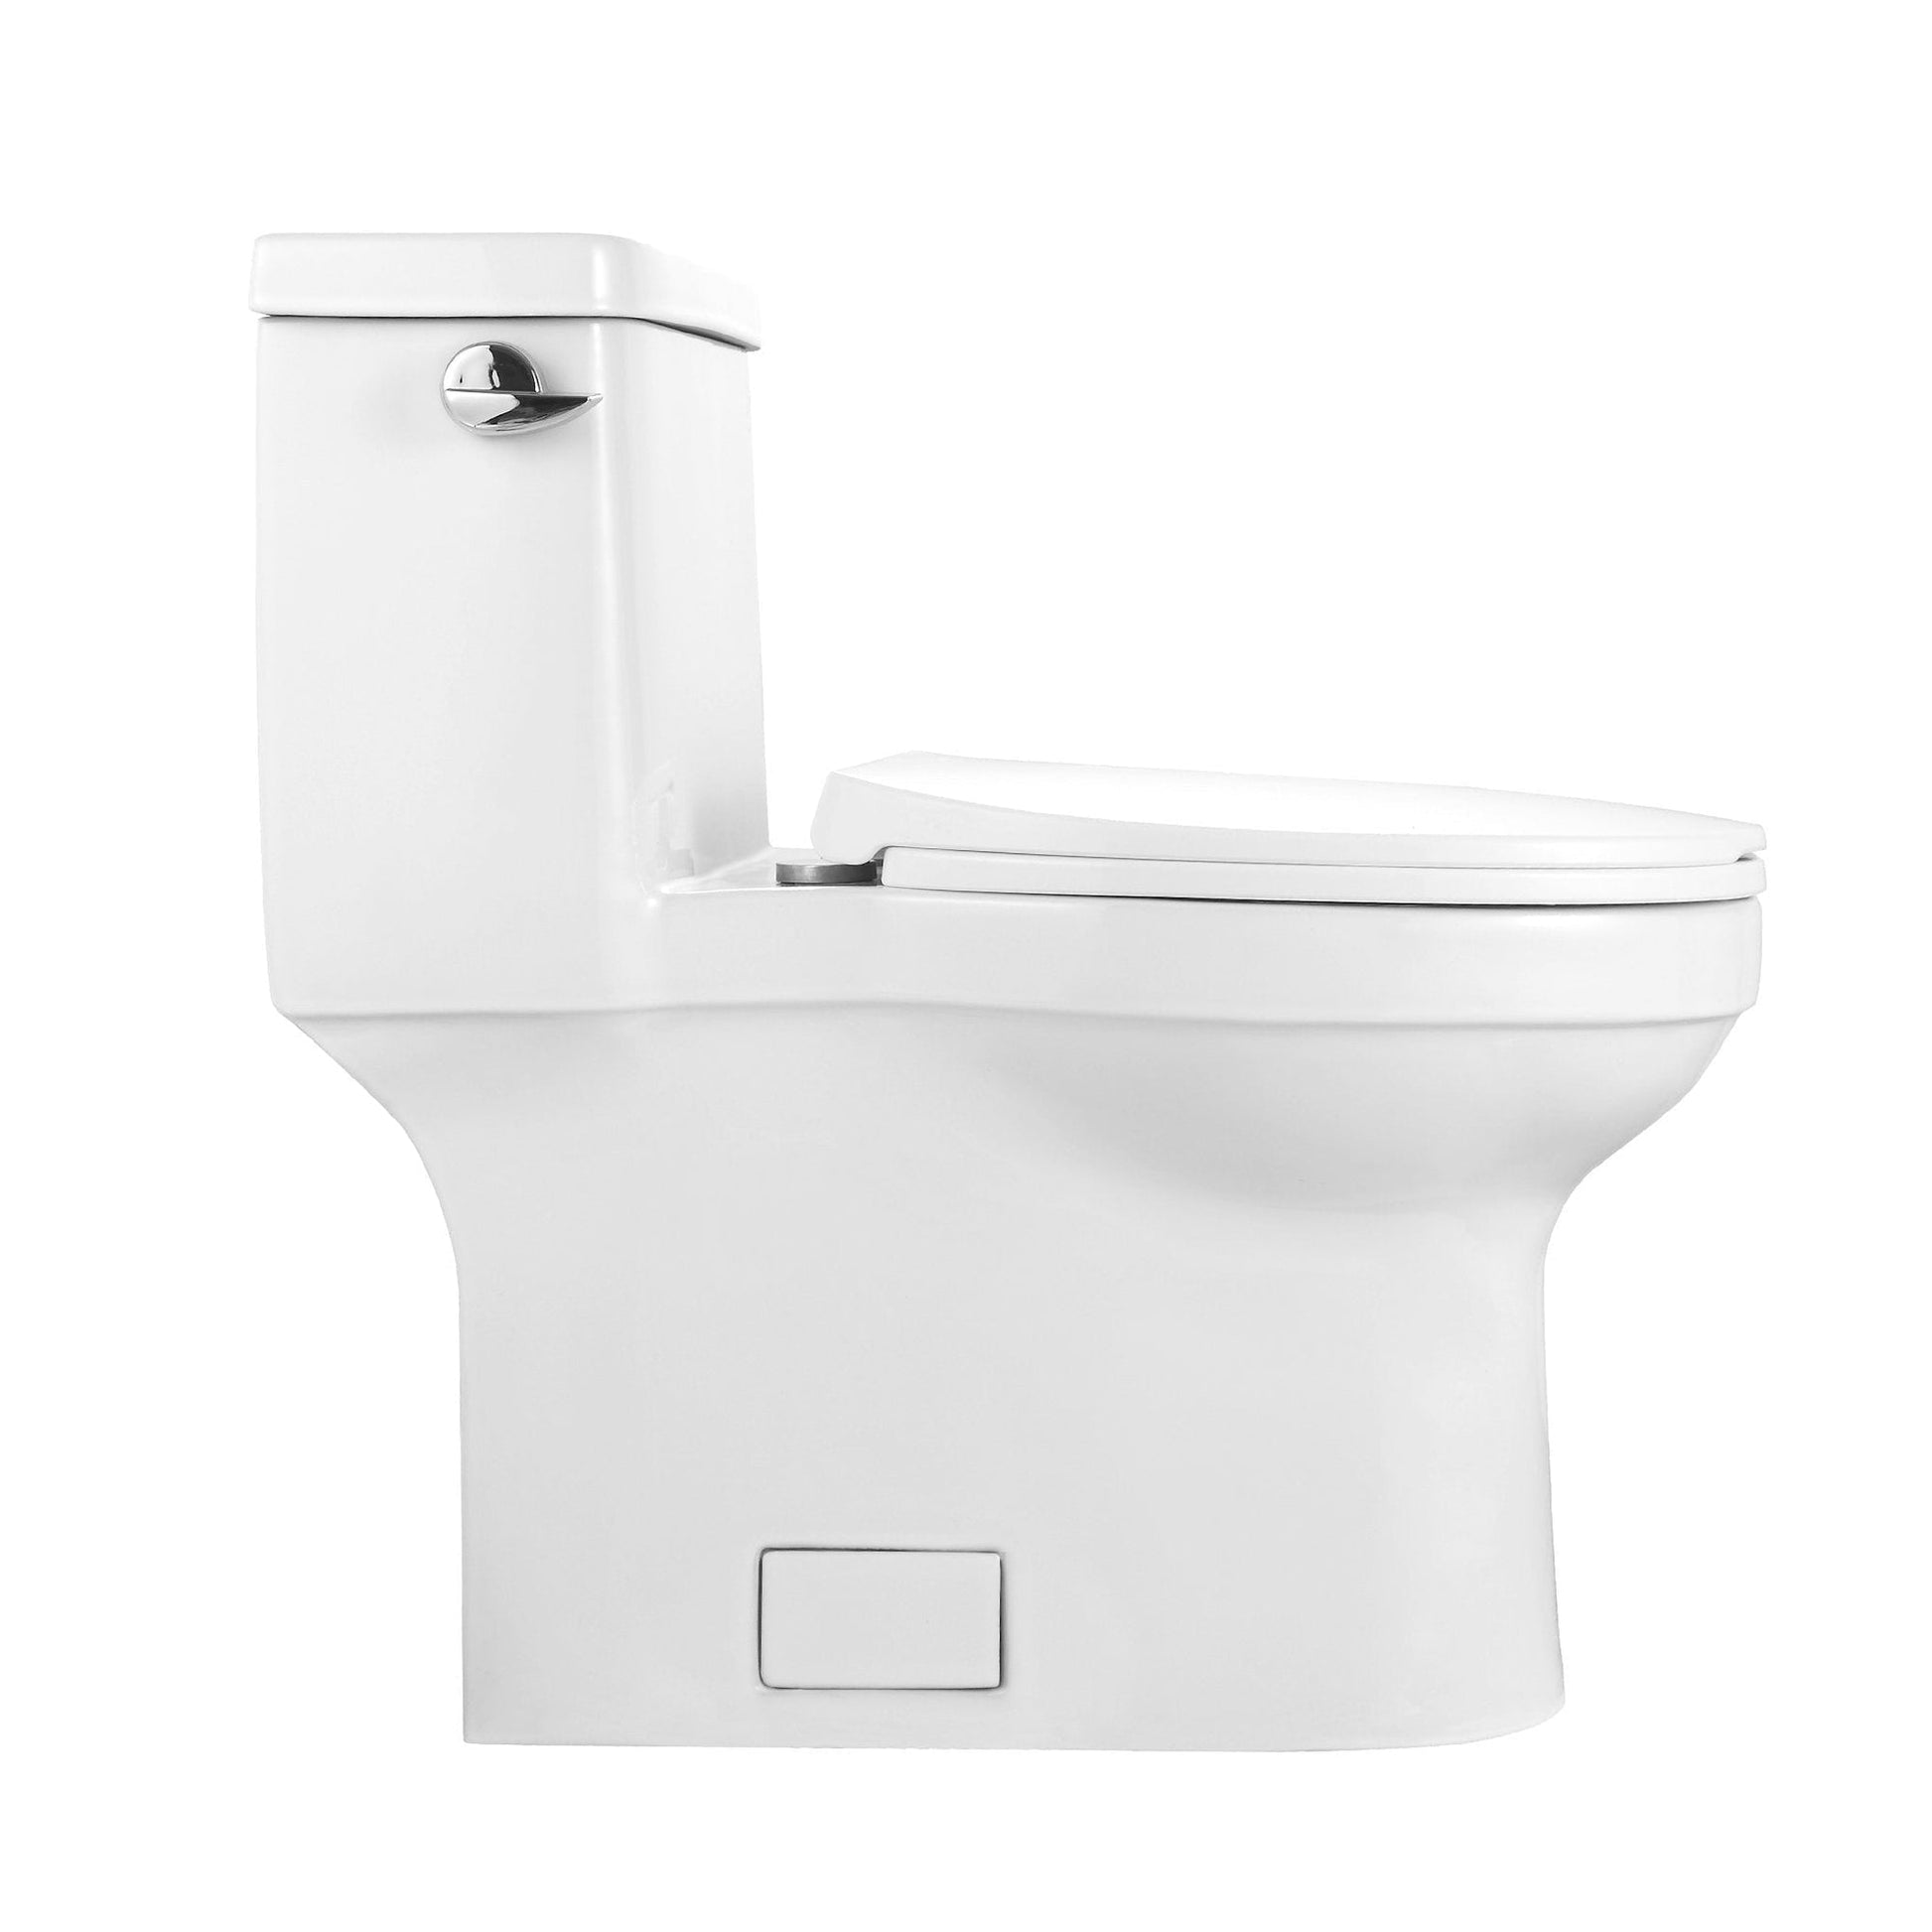 DeerValley Apex 1.28 GPF Tornado Single-Flush Elongated White Comfort Height One-Piece Toilet With Soft Closing Seat